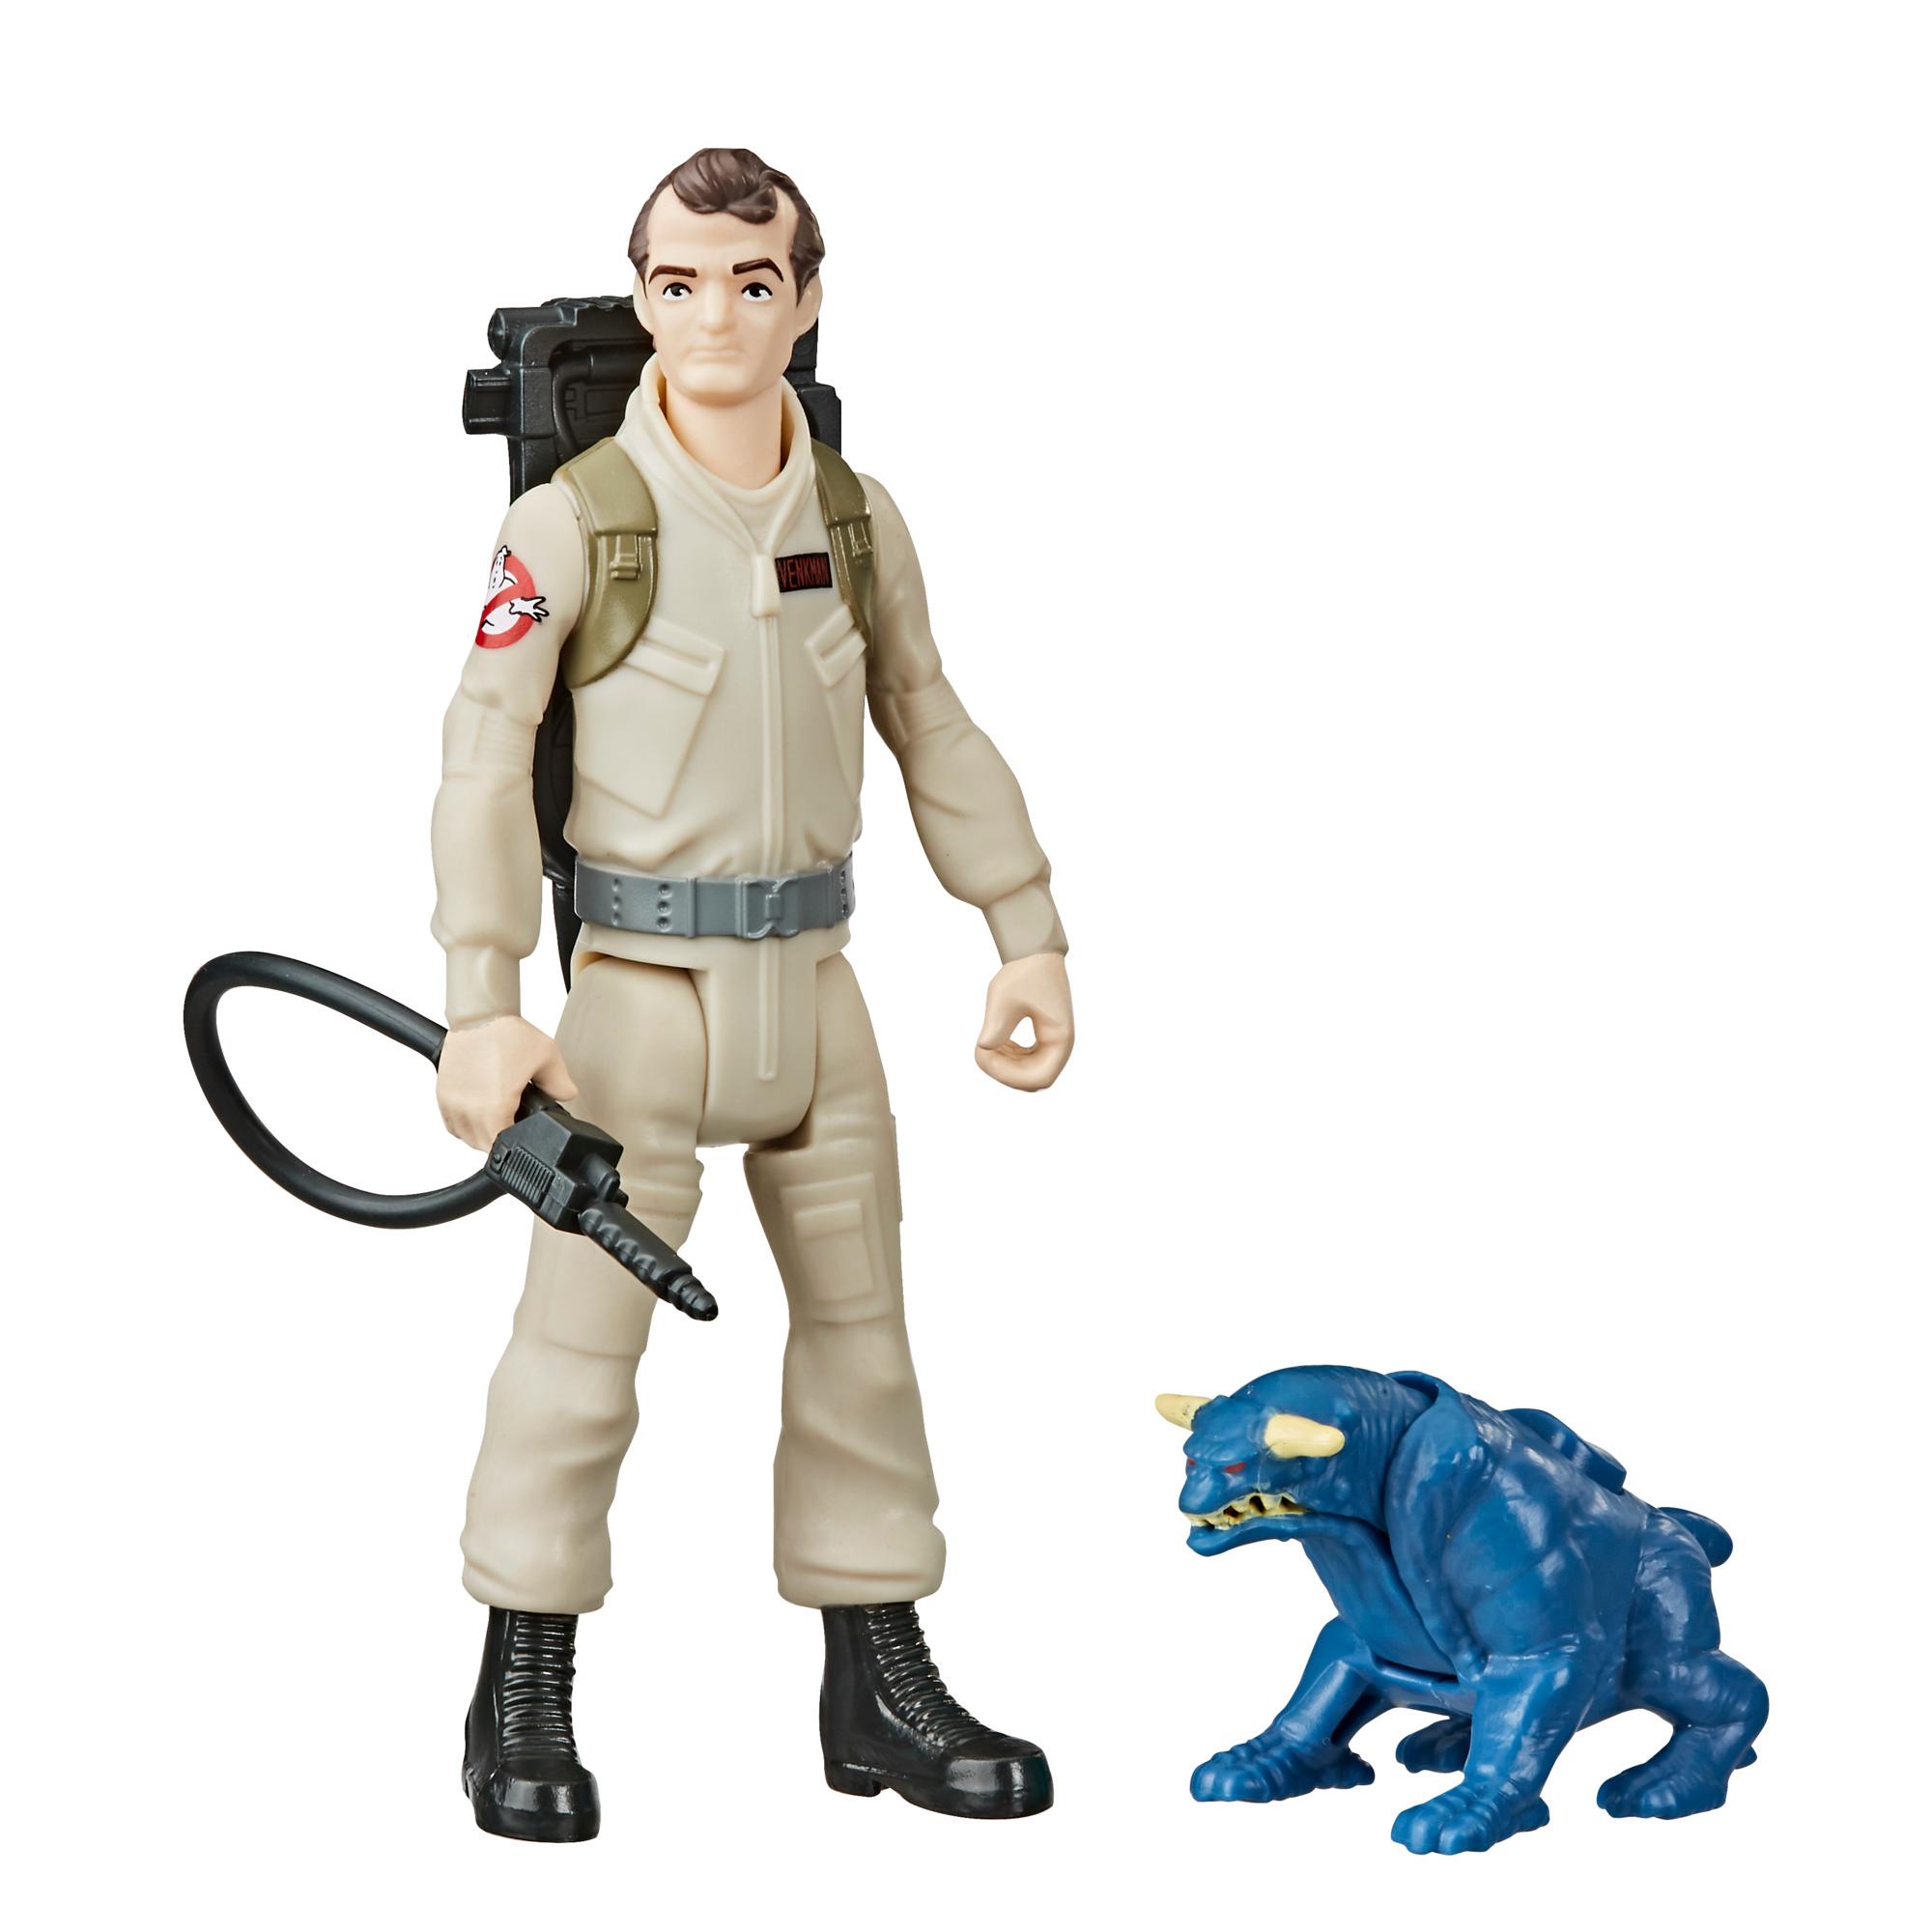 Ghostbusters Fright Features Peter Venkman Figure with Interactive Terror Dog Figure and Accessory, Kids Ages 4 and Up